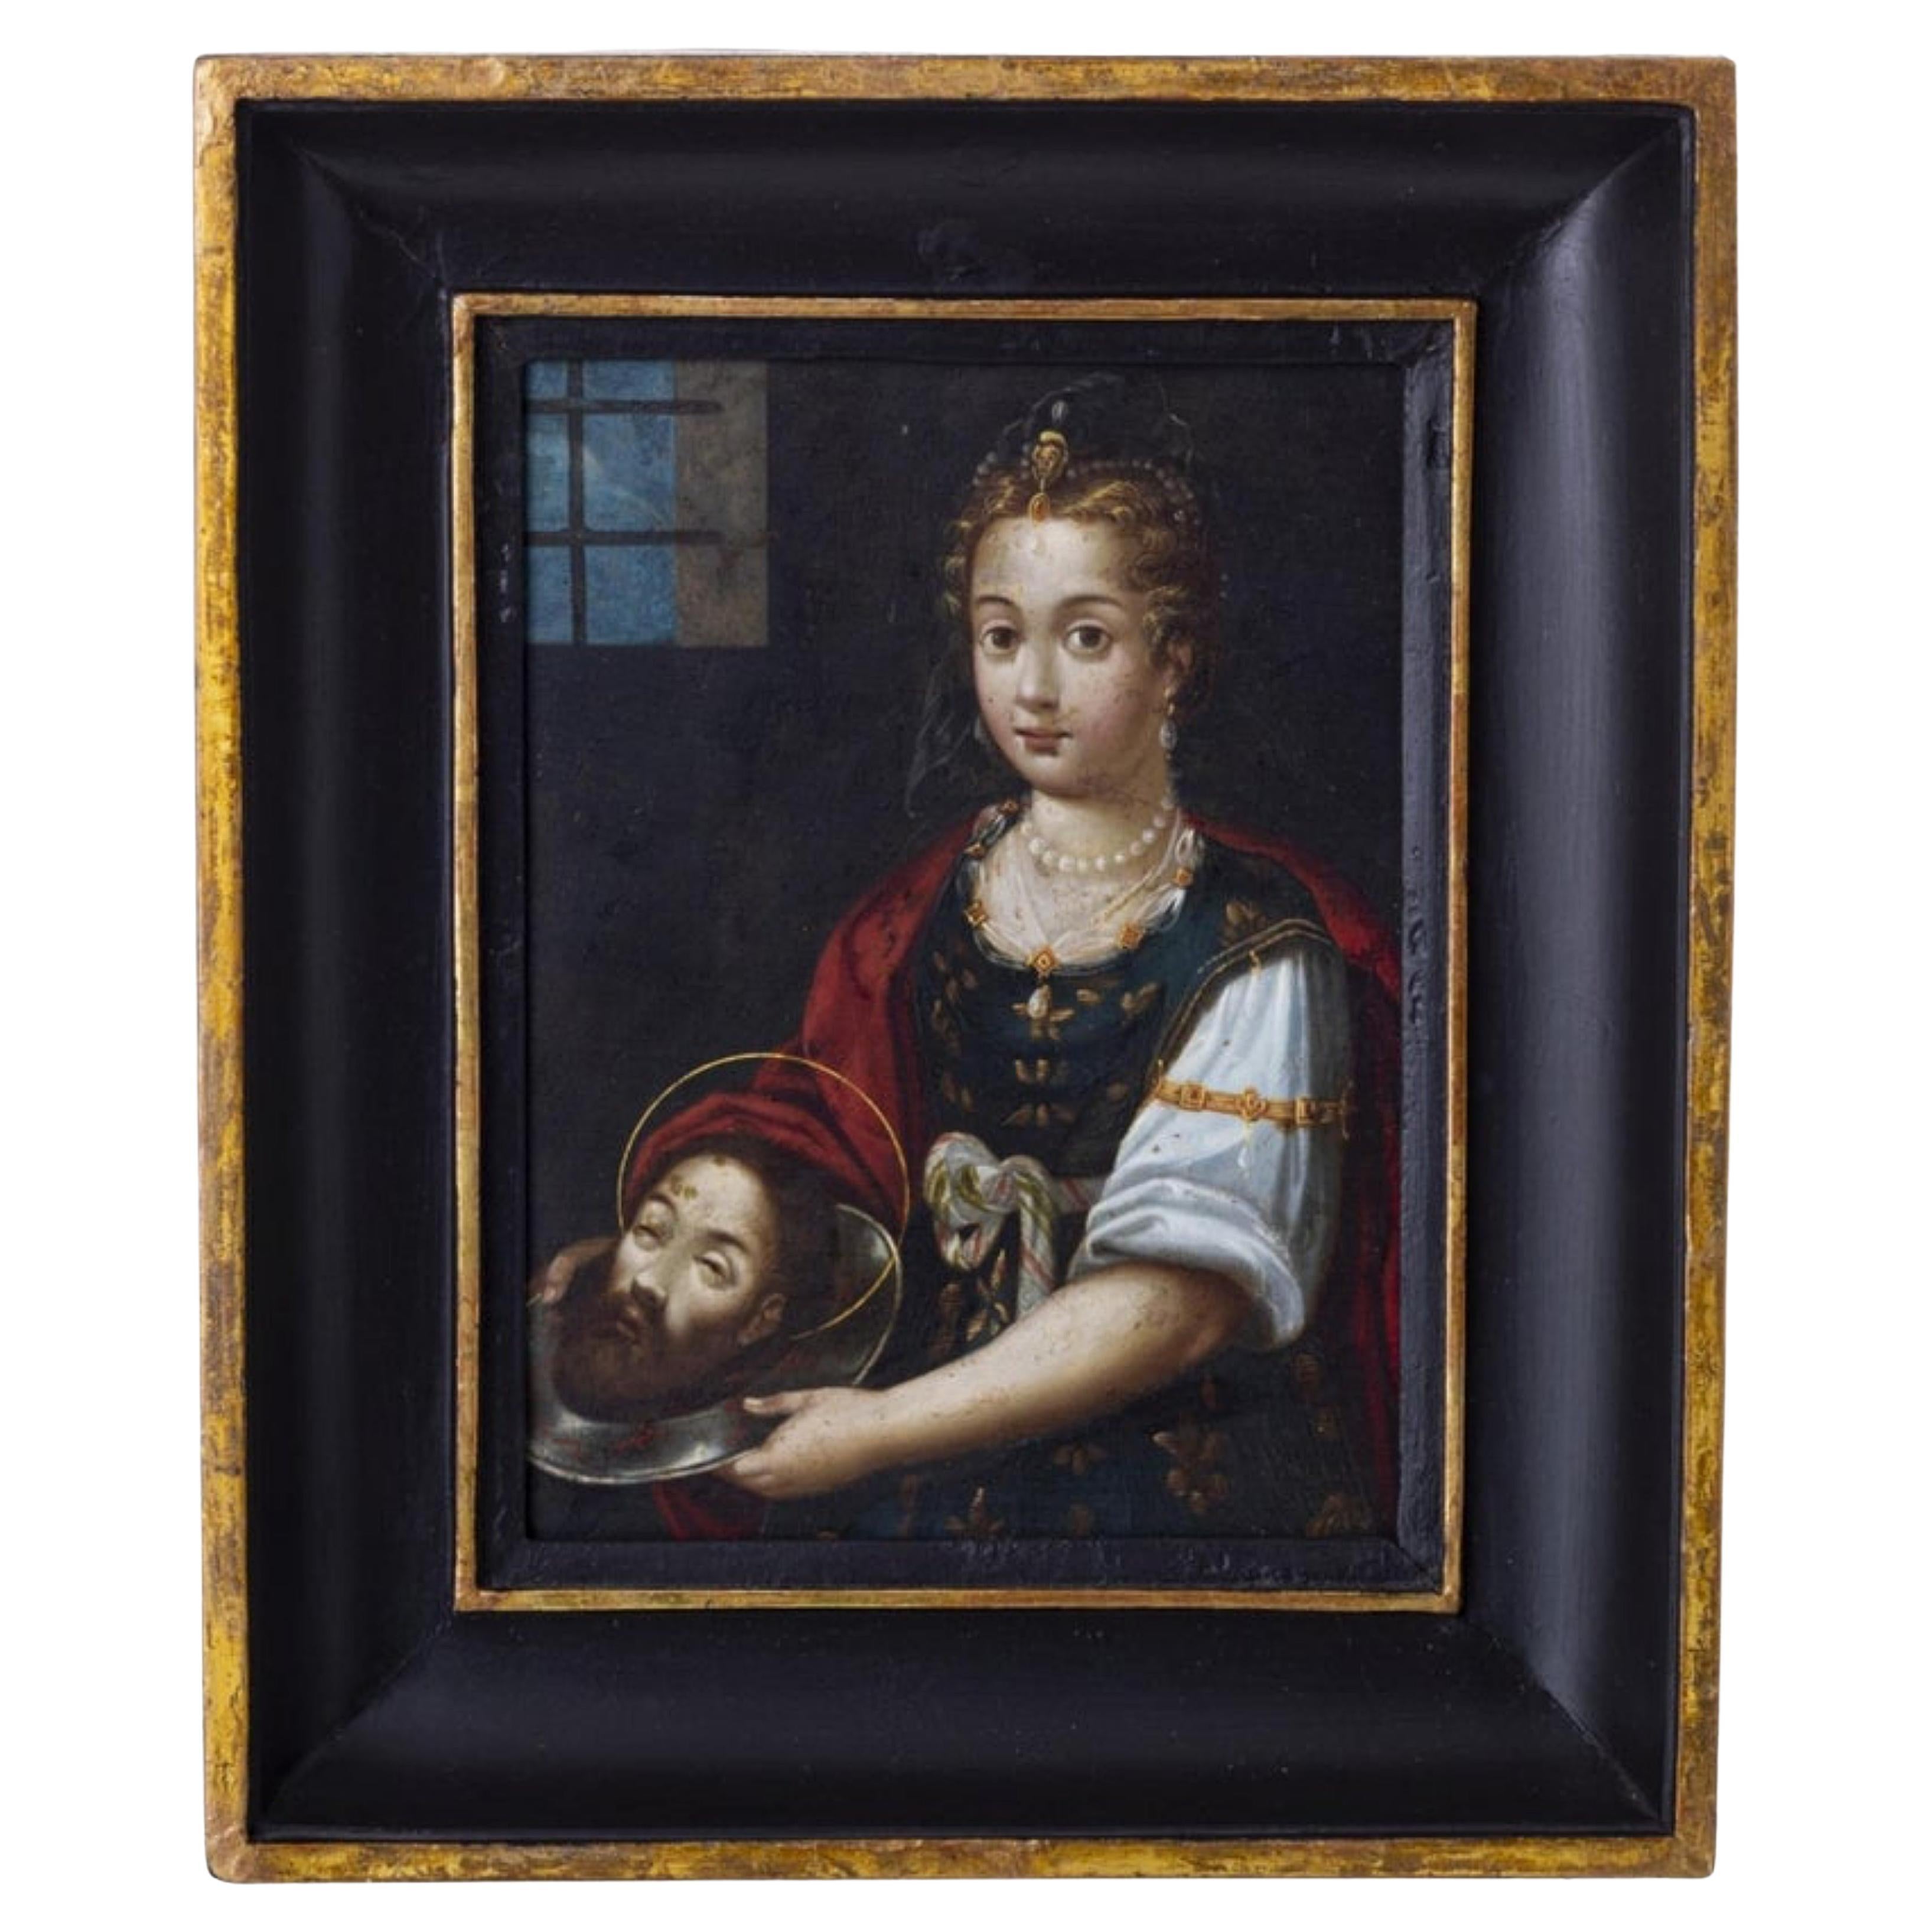 Italian School of the 17th Cent."Salome with the Head of Saint John the Baptist" For Sale